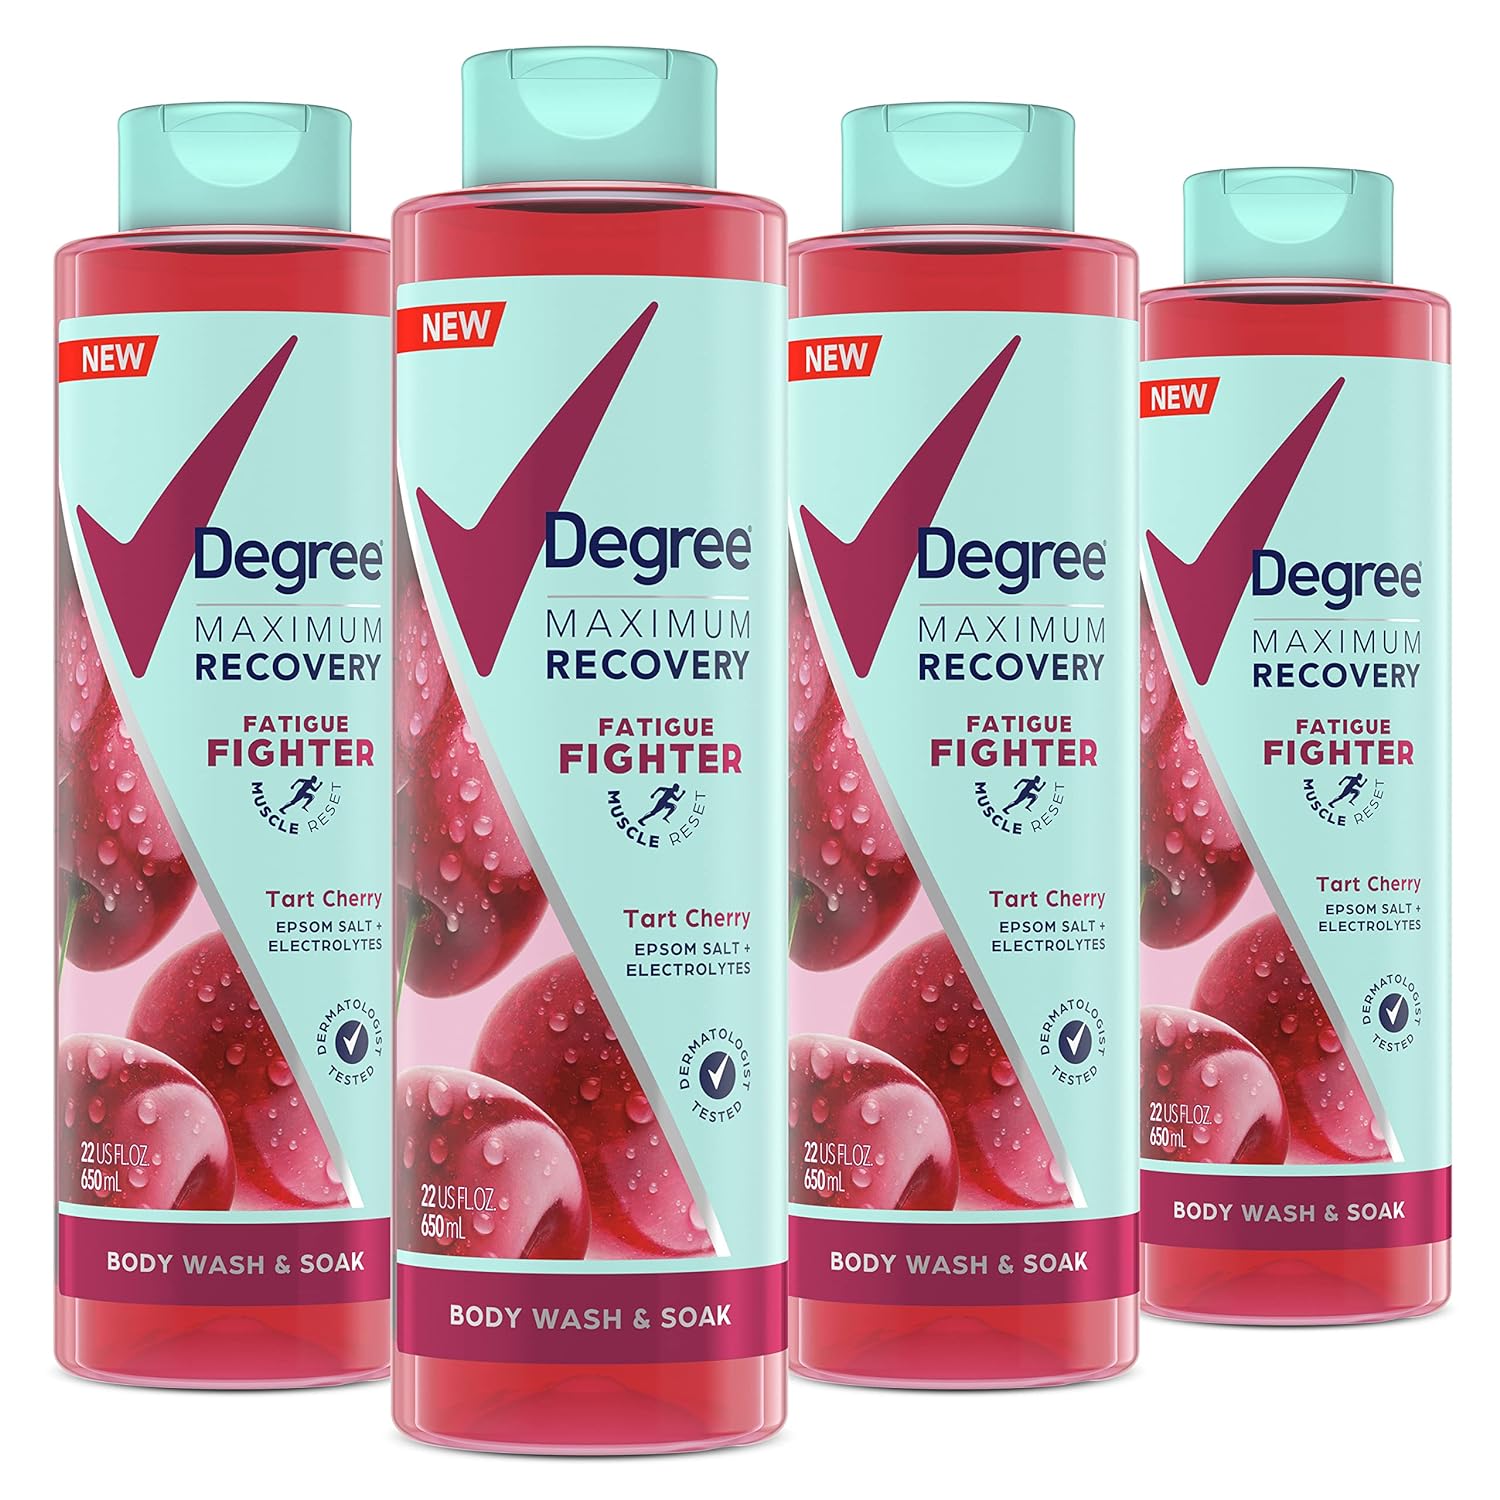 Degree Maximum Recovery Body Wash and Soak Post-Workout Recovery Skincare Routine Tart Cherry + Epsom Salt + Electrolytes Bath and Body Product 22 oz, Pack of 4